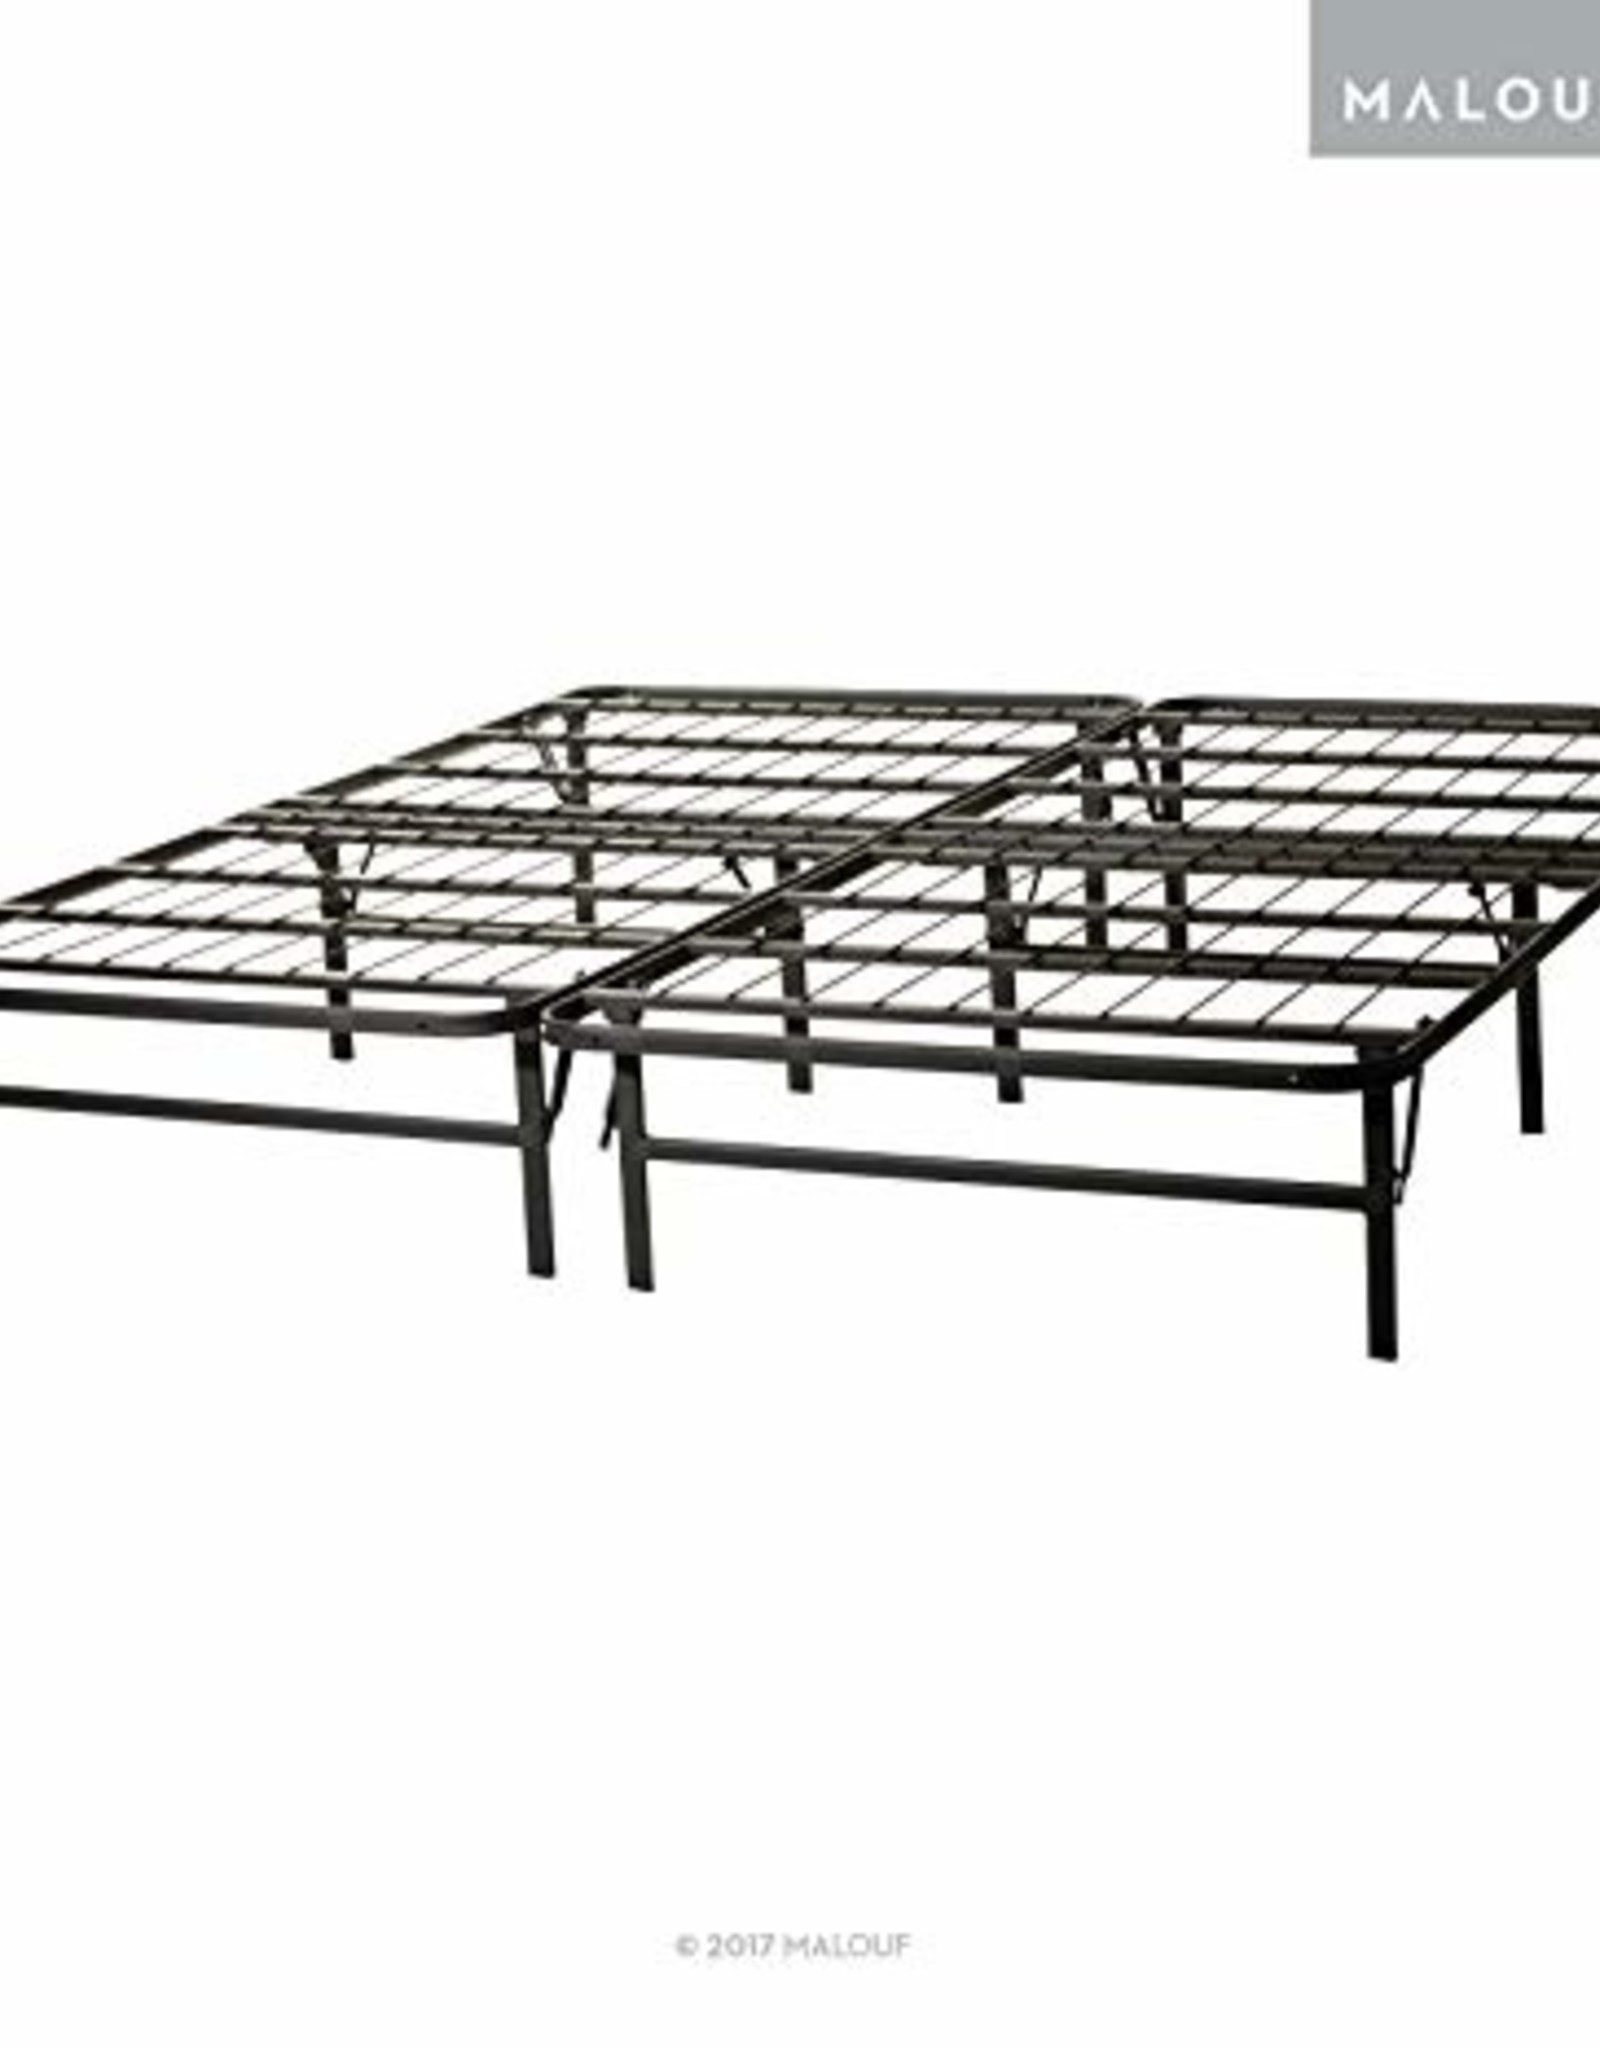 Malouf Queen High Rise Bed Frame: 18"